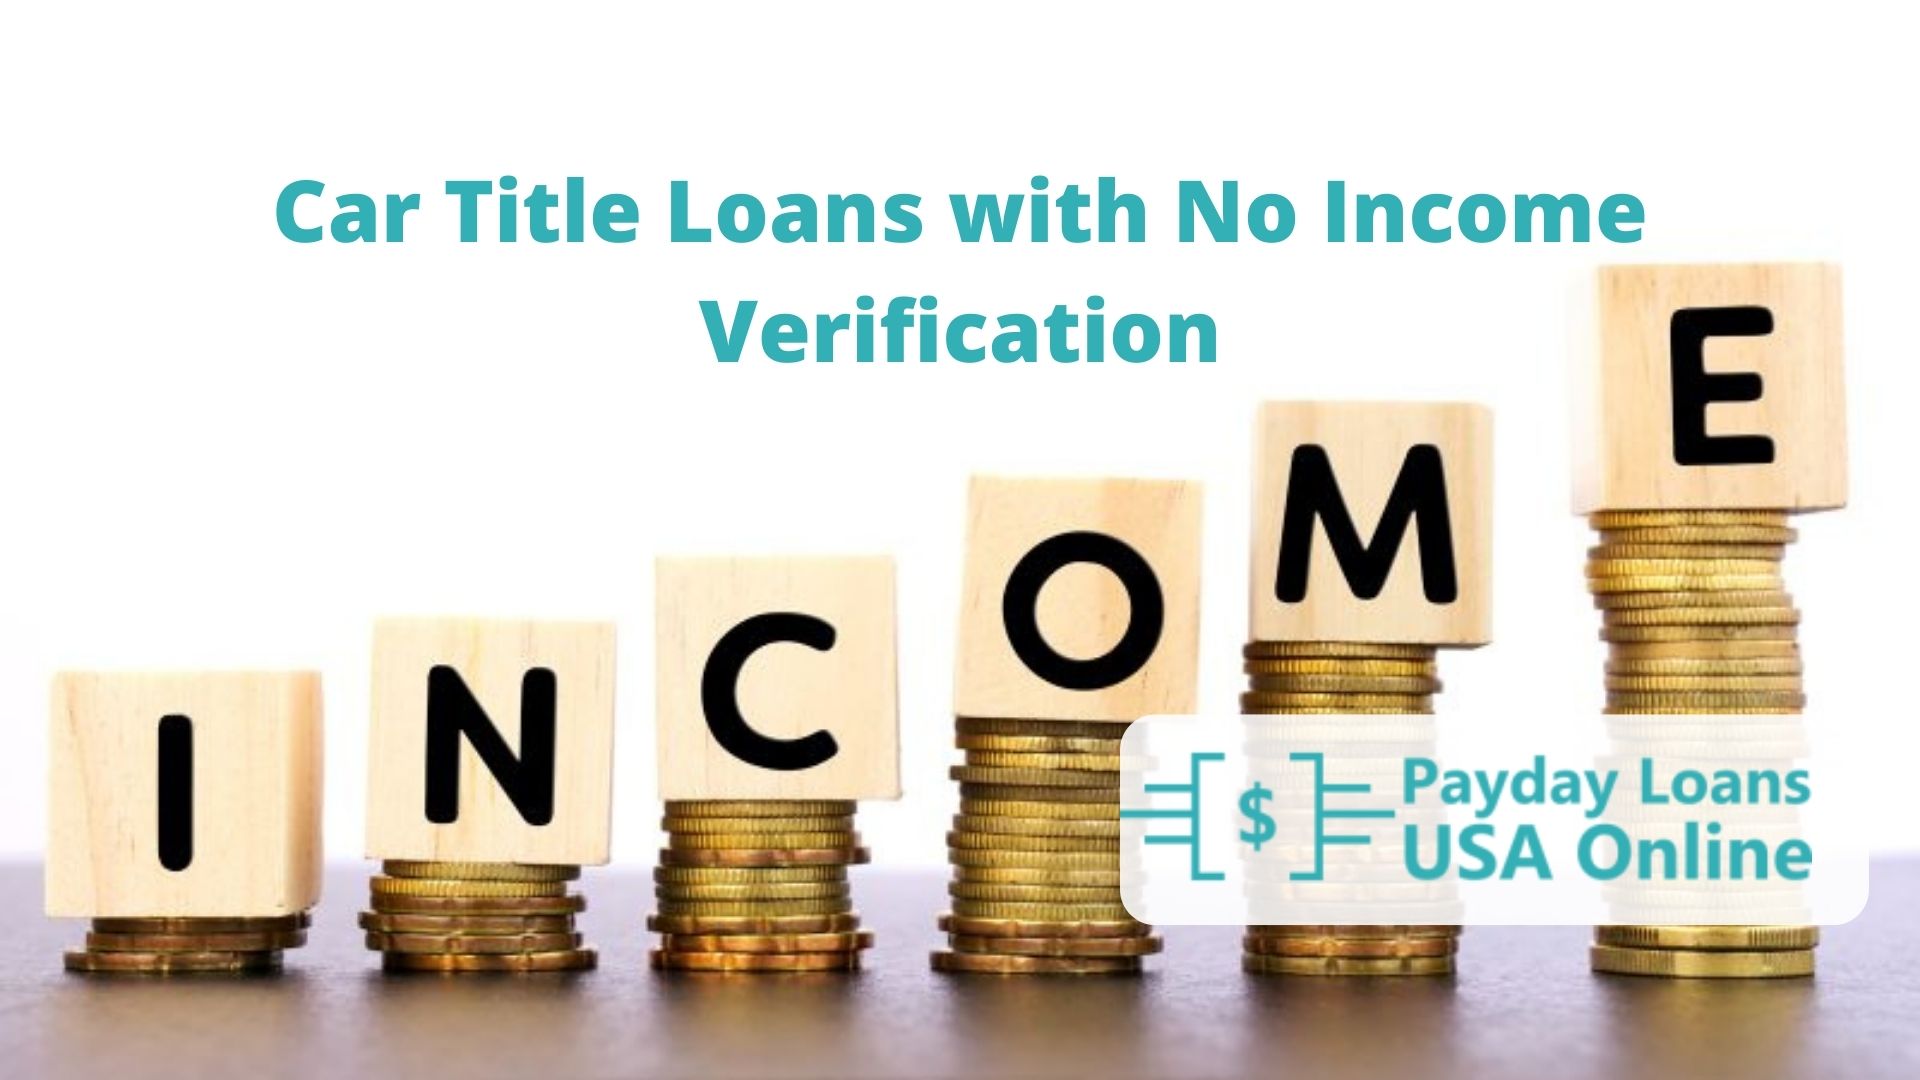 Car Title Loans with No Income Verification